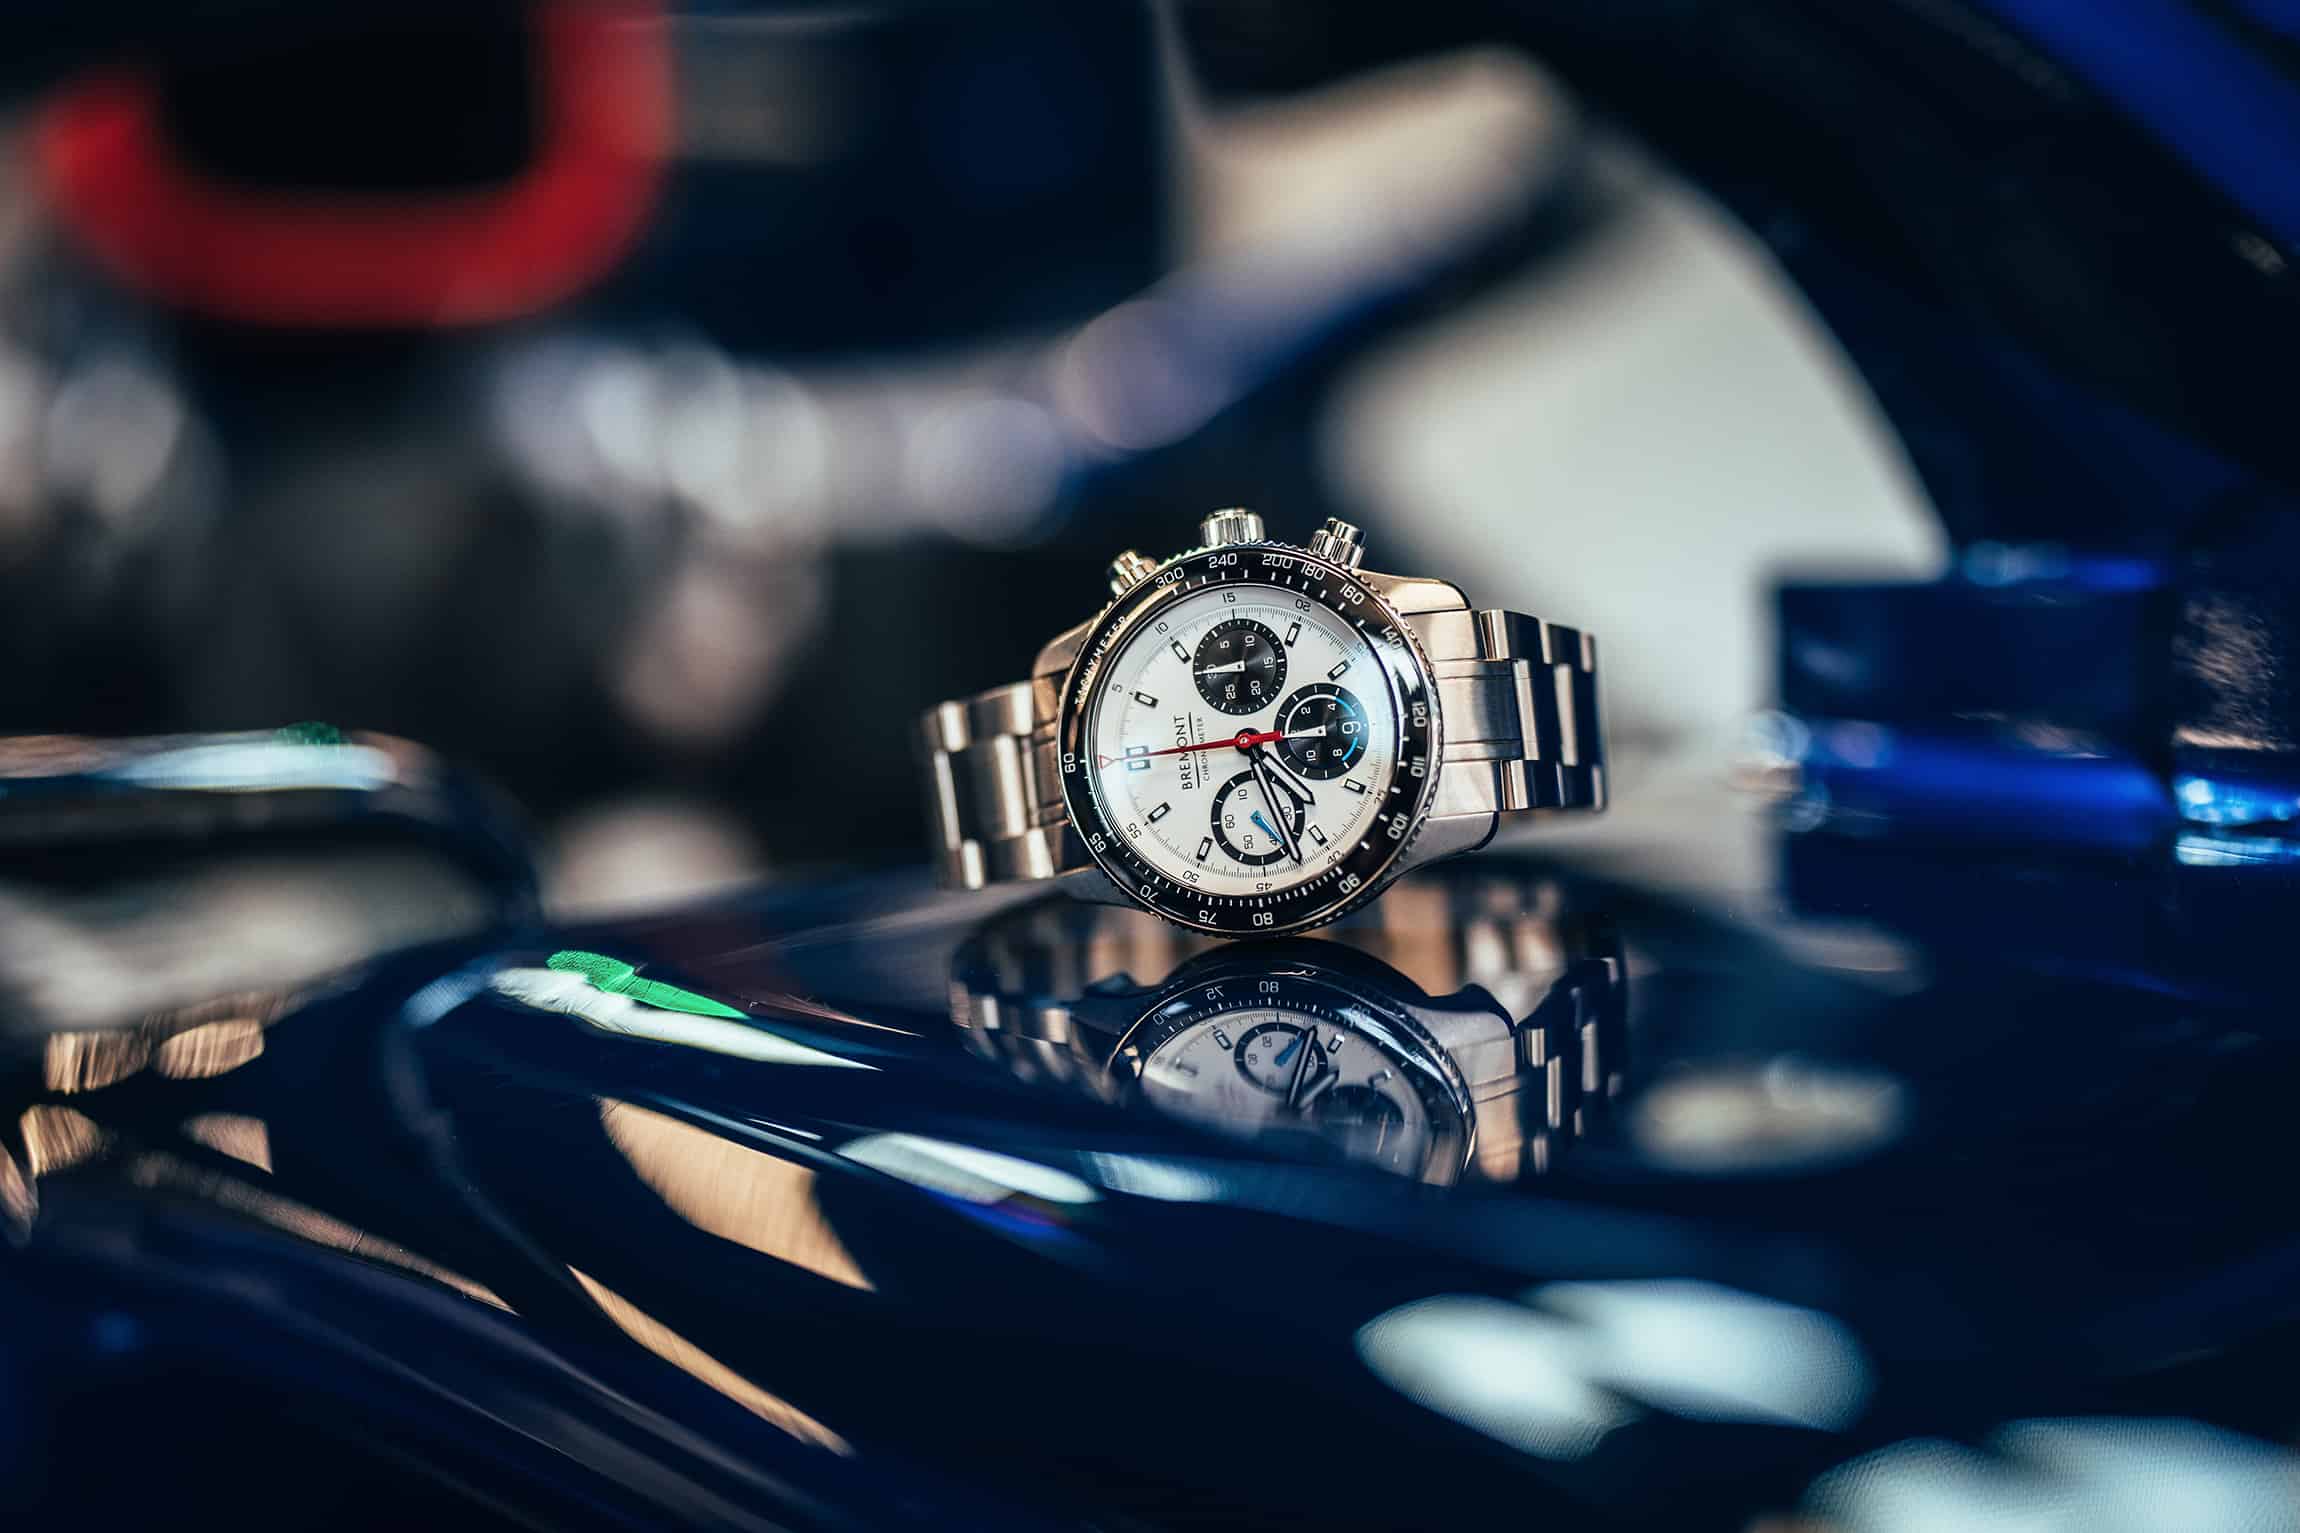 Bremont Kicks Off The 2022 Season Of F1 Racing With New WR-22 Chronograph